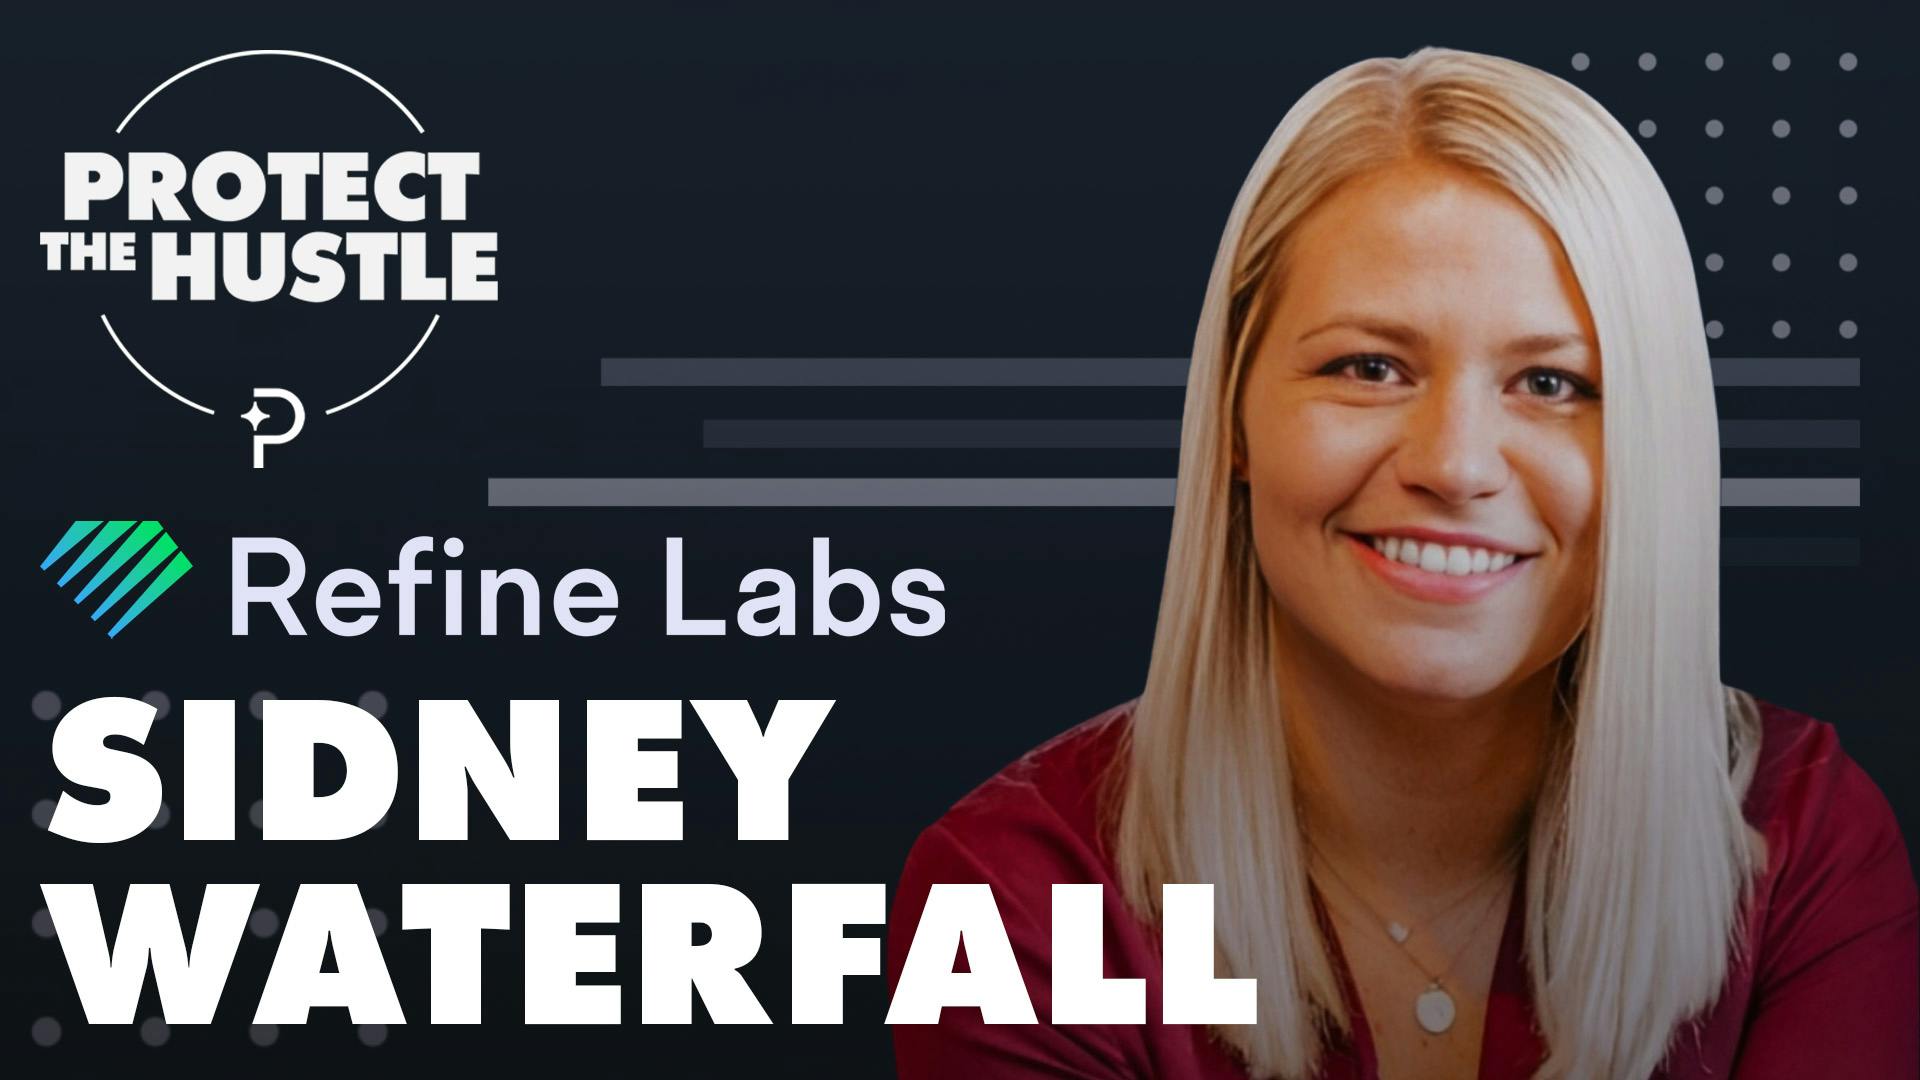 PTH Thumbnail featuring Refine Labs' Sidney Waterfall